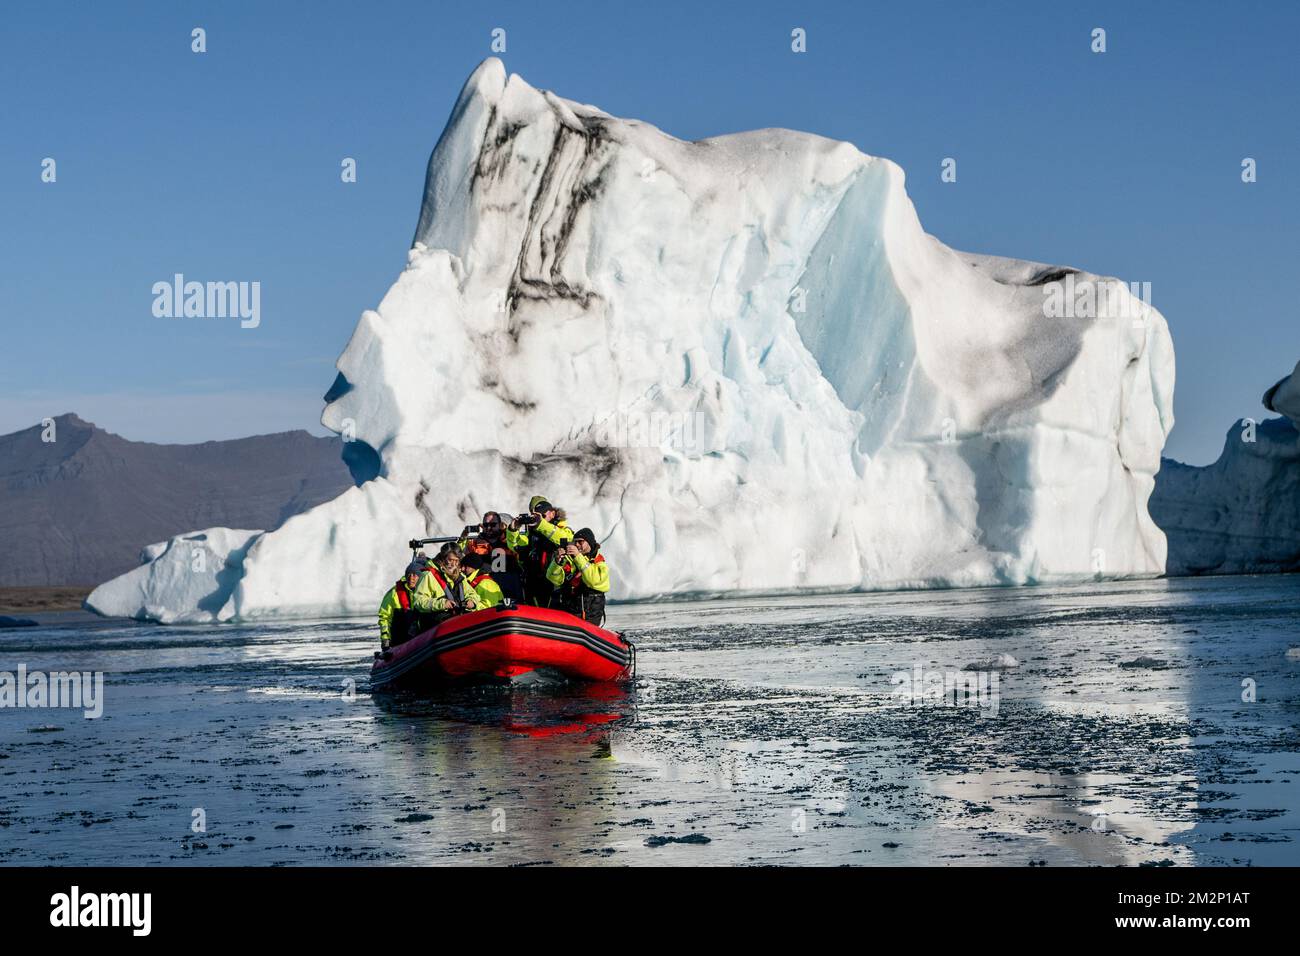 October 19, 2022, JÃ¶kulsÃrlÃ³n, JÃ¶kulsÃrlÃ³n, Iceland: A boat is seen sailing near icebergs floating in JÃ¶kulsÃrlÃ³n. JÃ¶kulsÃrlÃ³n is a lake located in southern Iceland, with an area of 20 km2 and a depth of over 200 meters. Until less than 100 years ago, the BreiÃ°amerkurjÃ¶kull glacier (part of the VatnajÃ¶kull glacier) extended even beyond the ring road. Due to rising temperatures, the glacier has retreated, creating this impressive glacial lagoon. (Credit Image: © Jorge Castellanos/SOPA Images via ZUMA Press Wire) Stock Photo